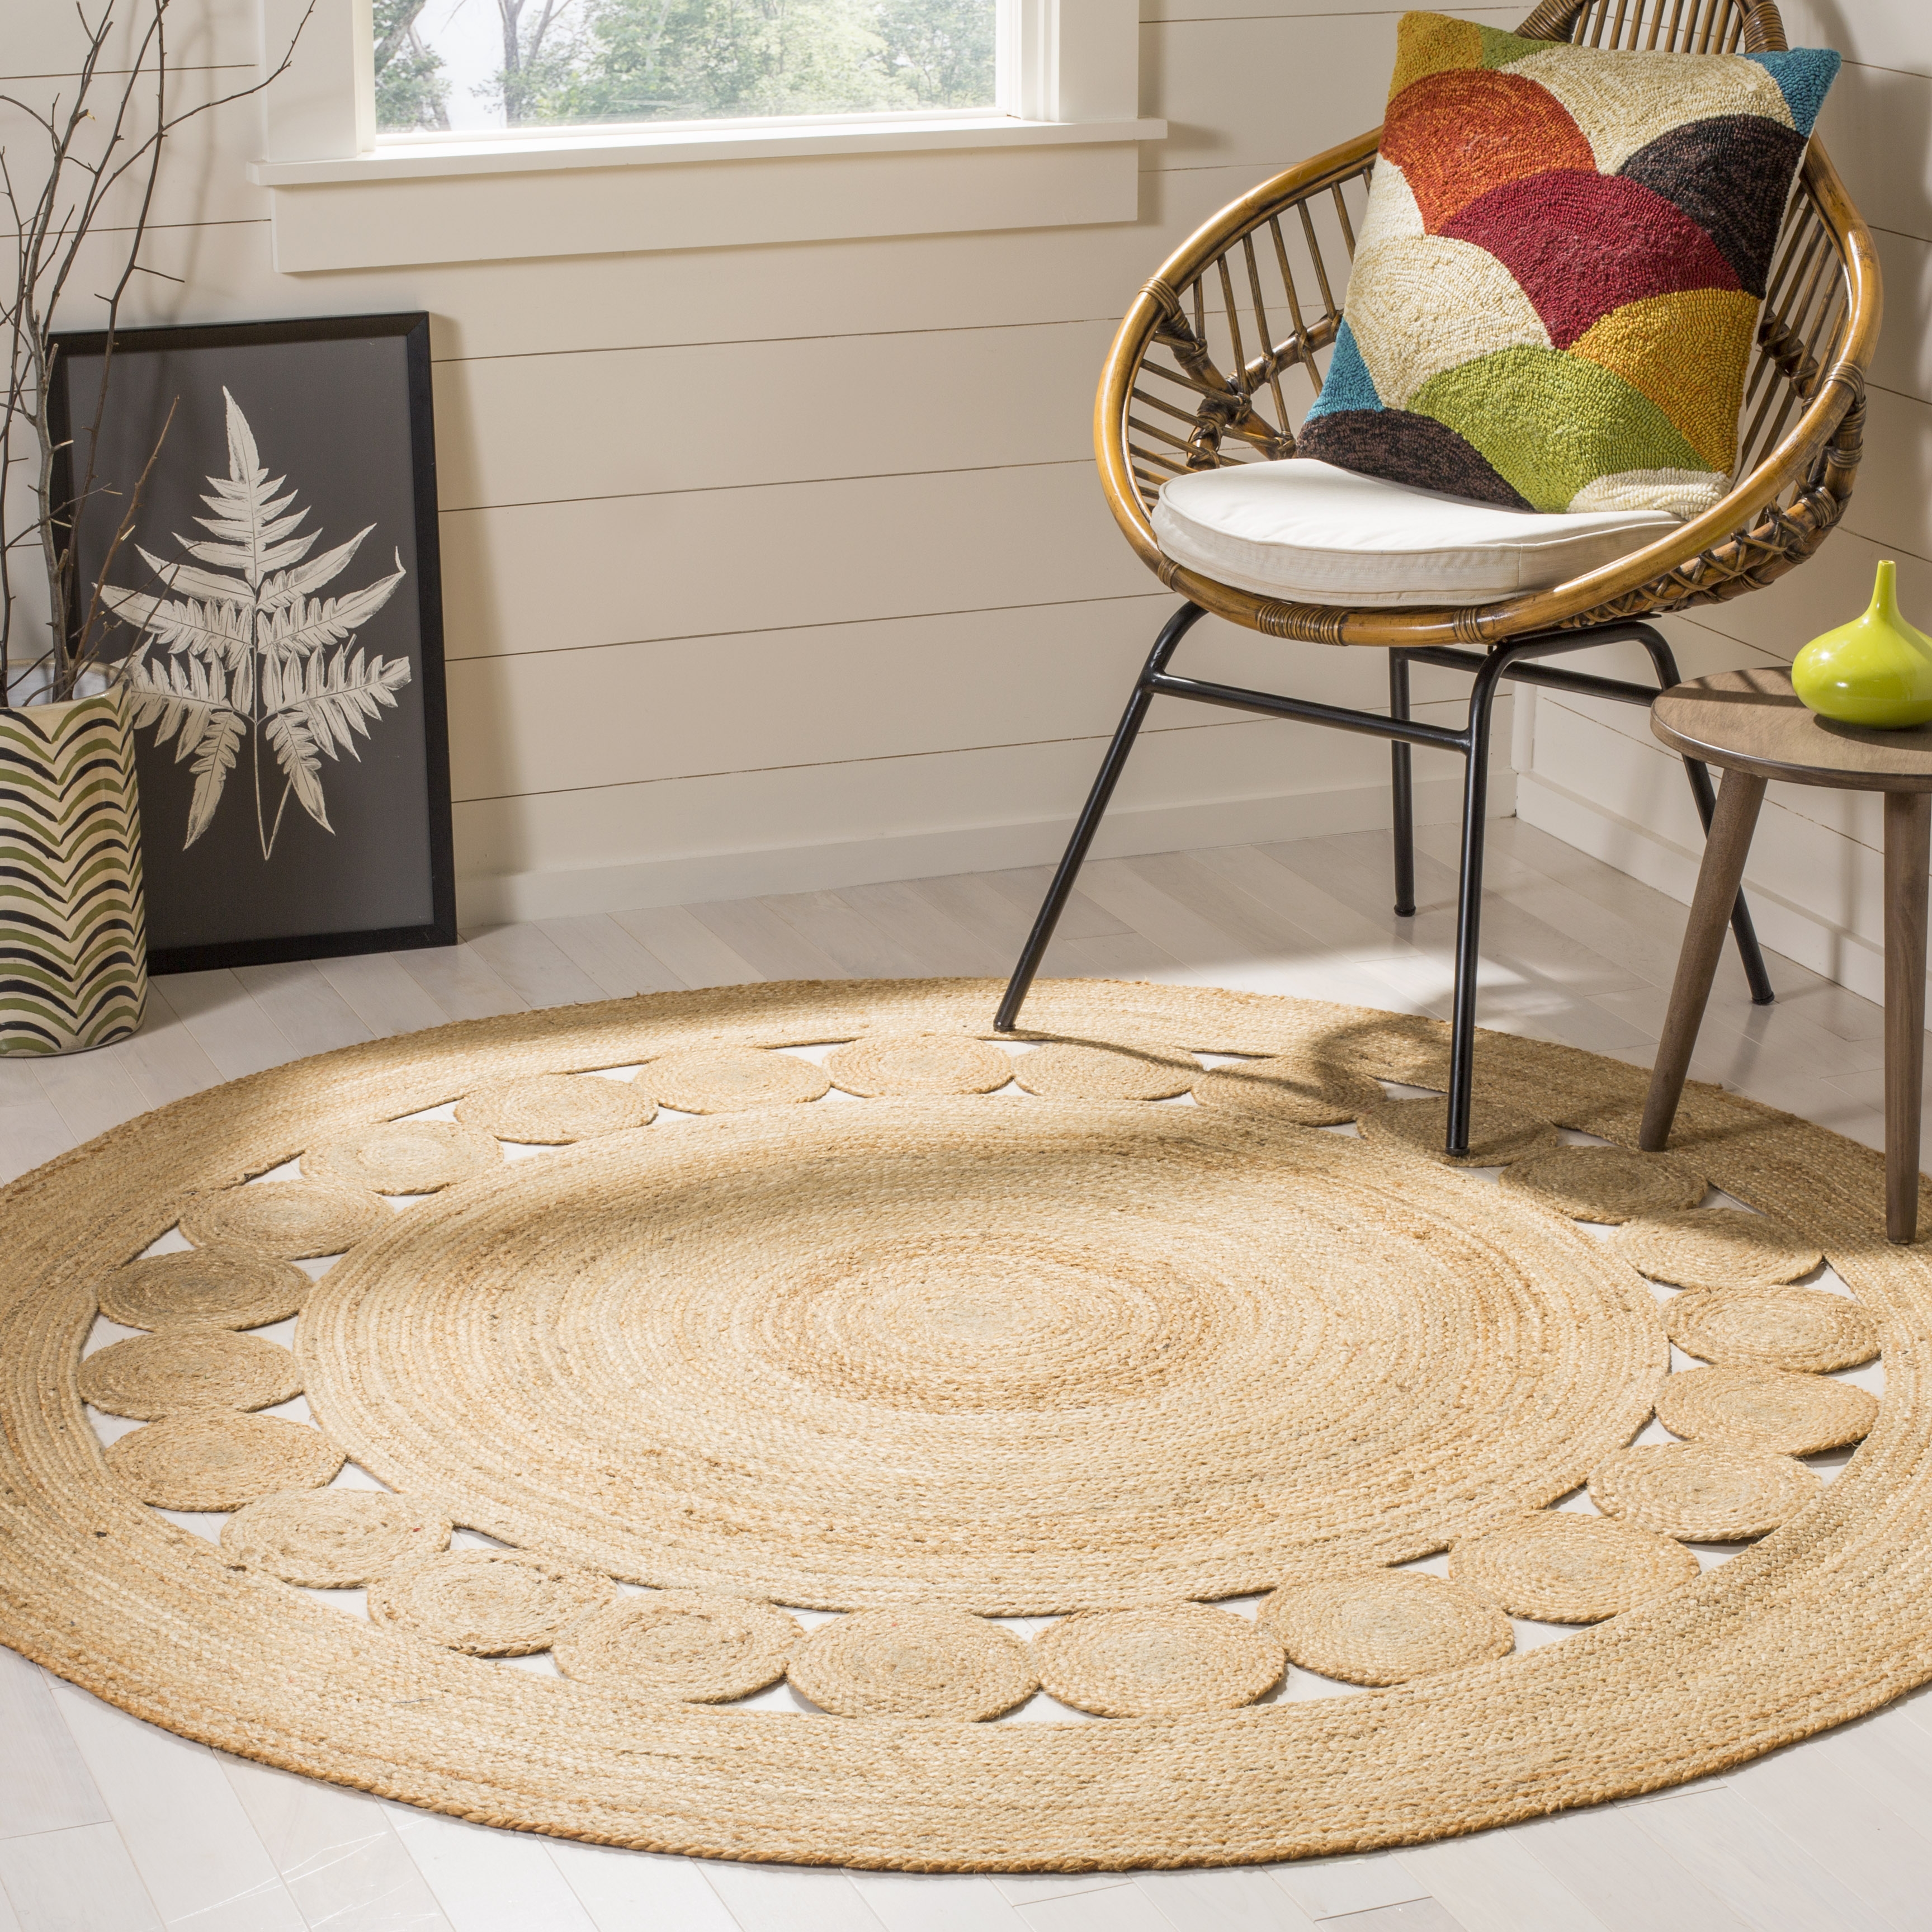 Arlo Home Hand Woven Area Rug, NF364A, Natural,  3' X 3' Round - Image 1